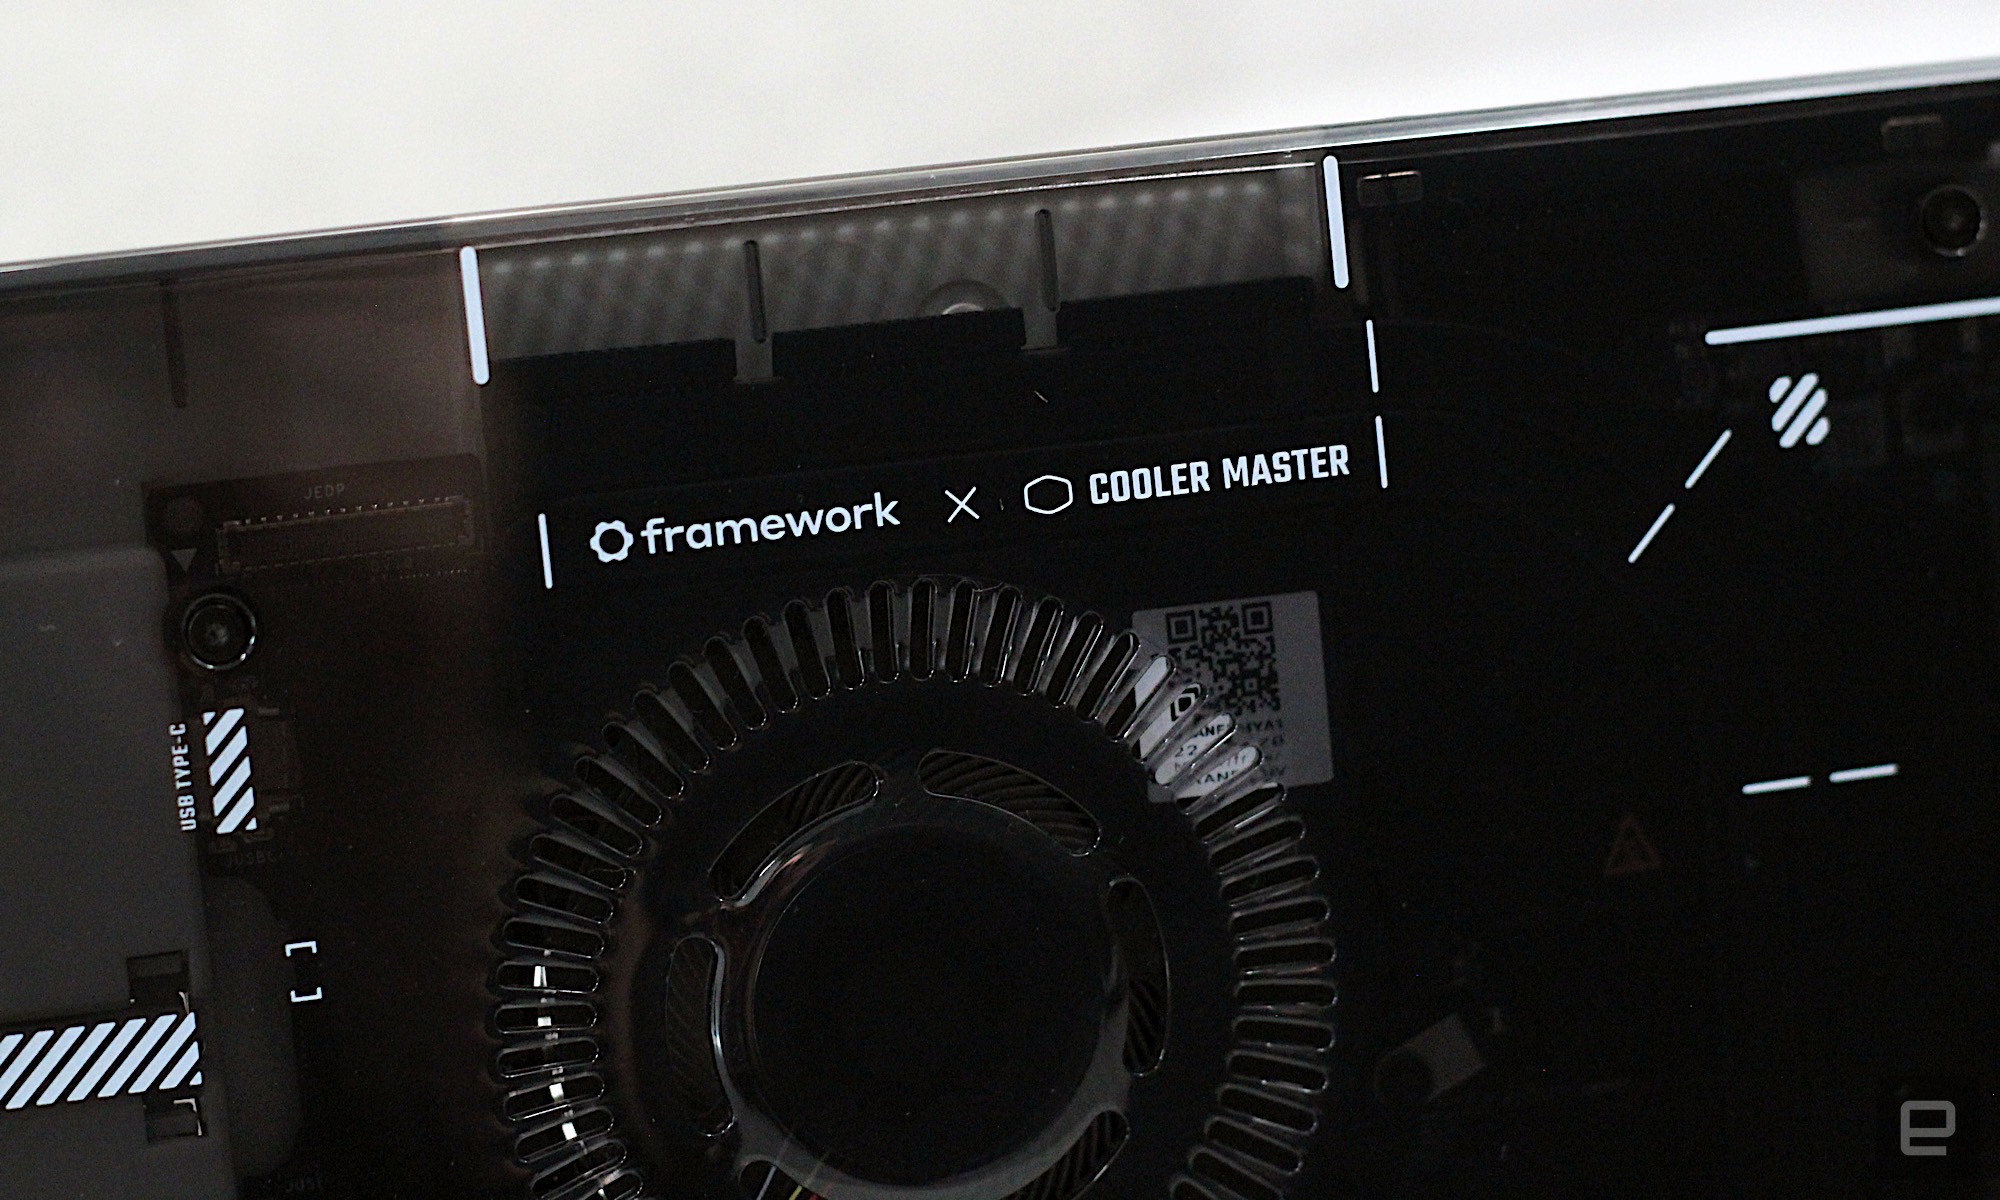 Close-up of the Framework x Cooler Master logo on the front of the case in front of a gray painted wall.